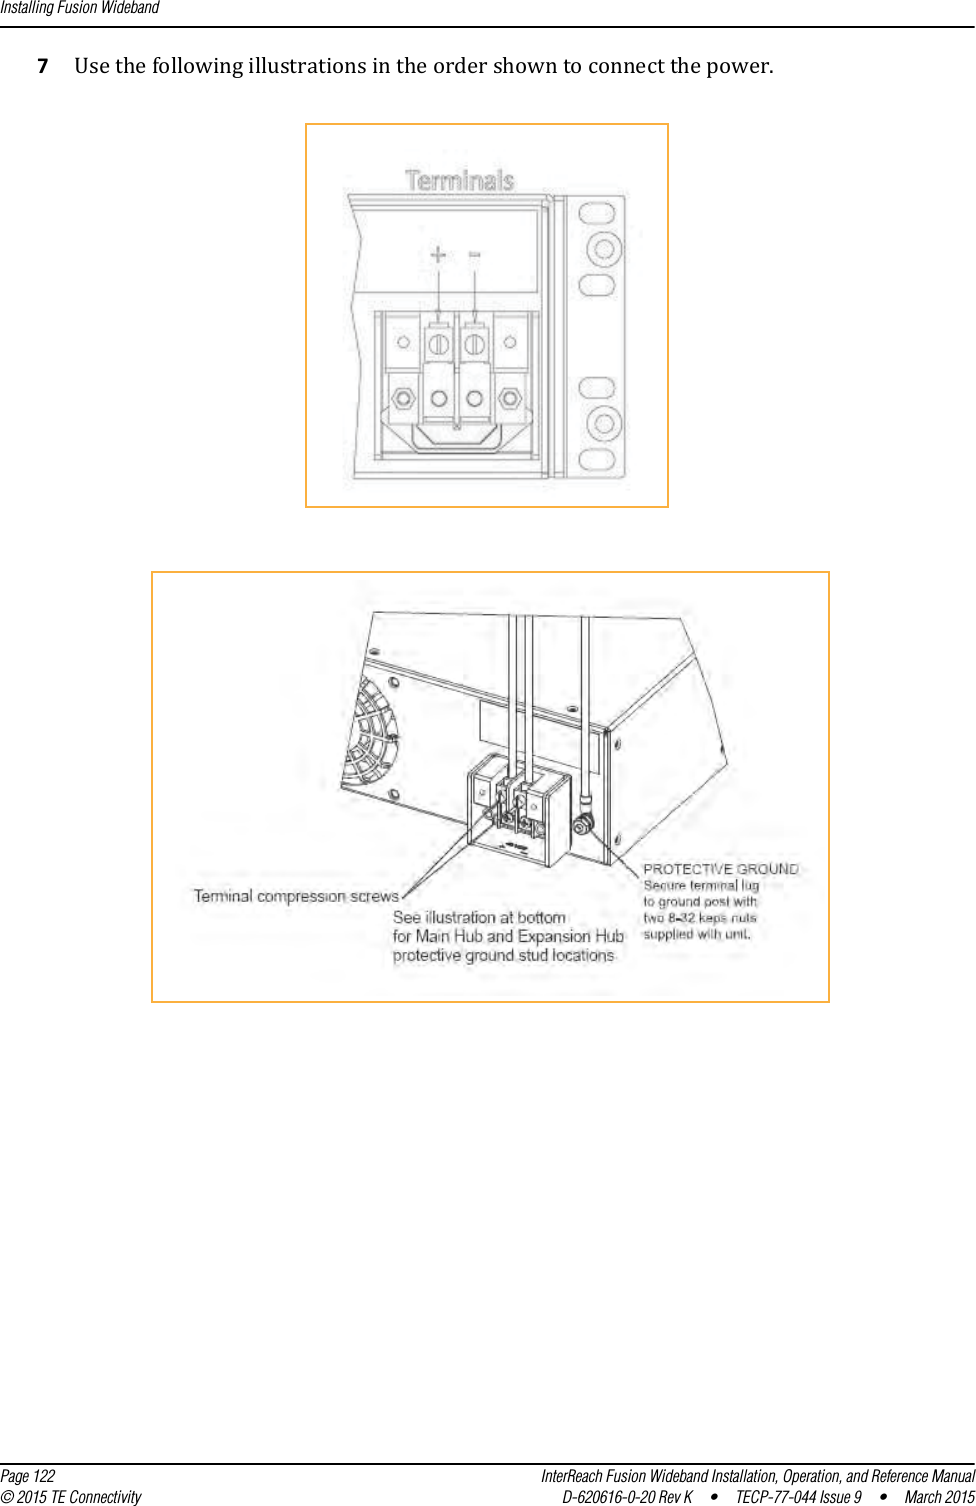 Installing Fusion Wideband  Page 122 InterReach Fusion Wideband Installation, Operation, and Reference Manual© 2015 TE Connectivity D-620616-0-20 Rev K  •  TECP-77-044 Issue 9  •  March 20157Use the following illustrations in the order shown to connect the power.